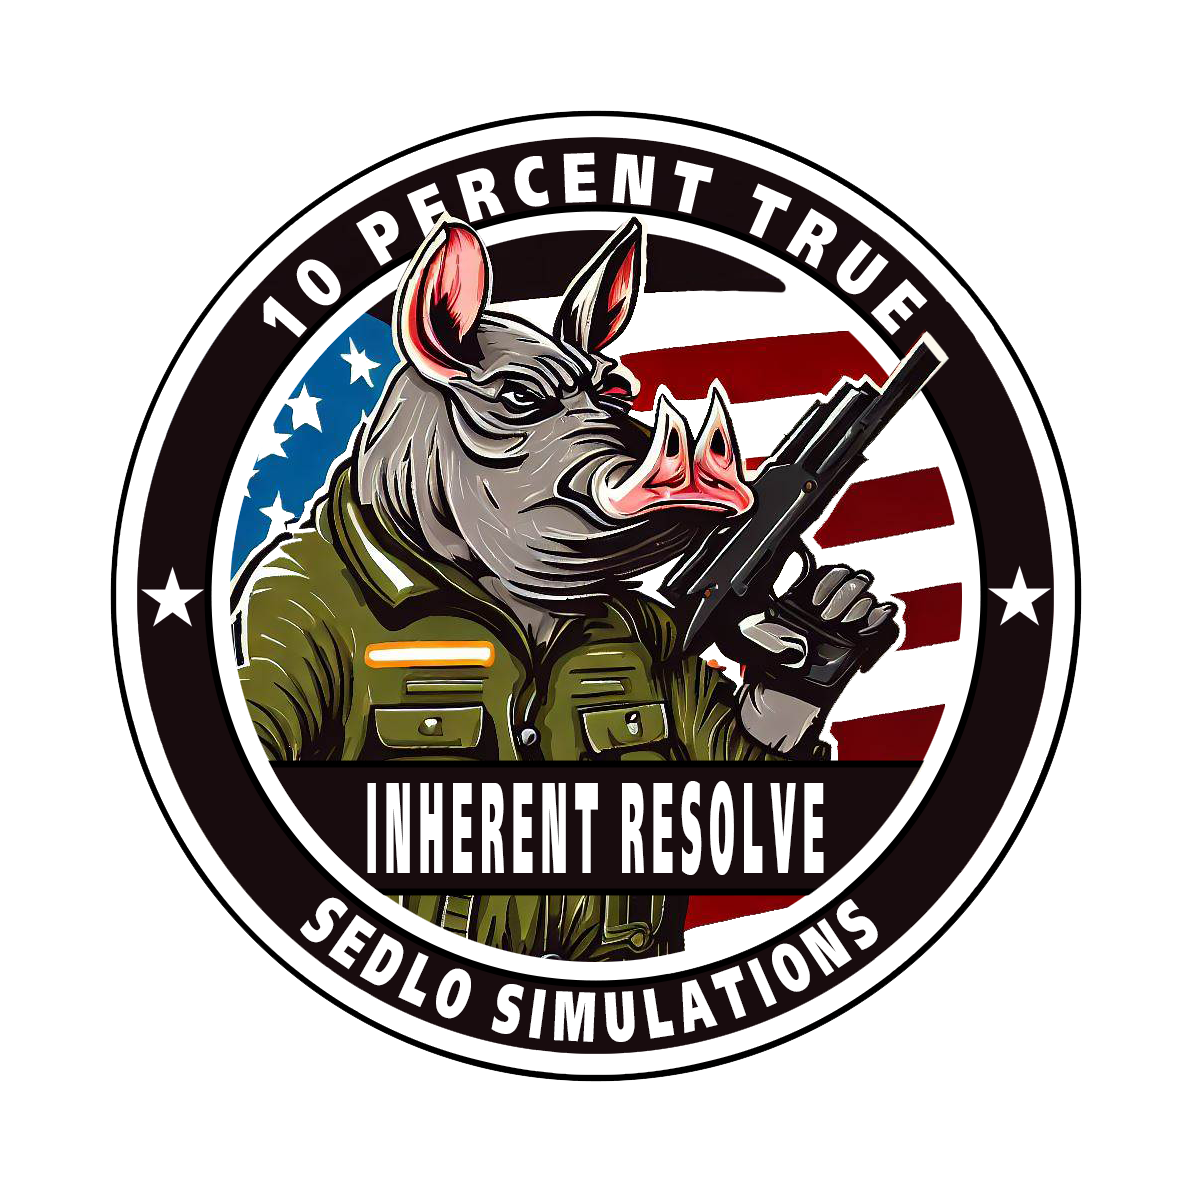 10 Percent True and Sedlo Present: Operation Inherent Resolve - An A-10C II Mission (ver 2.9.3.00A, 2024-Feb-22)